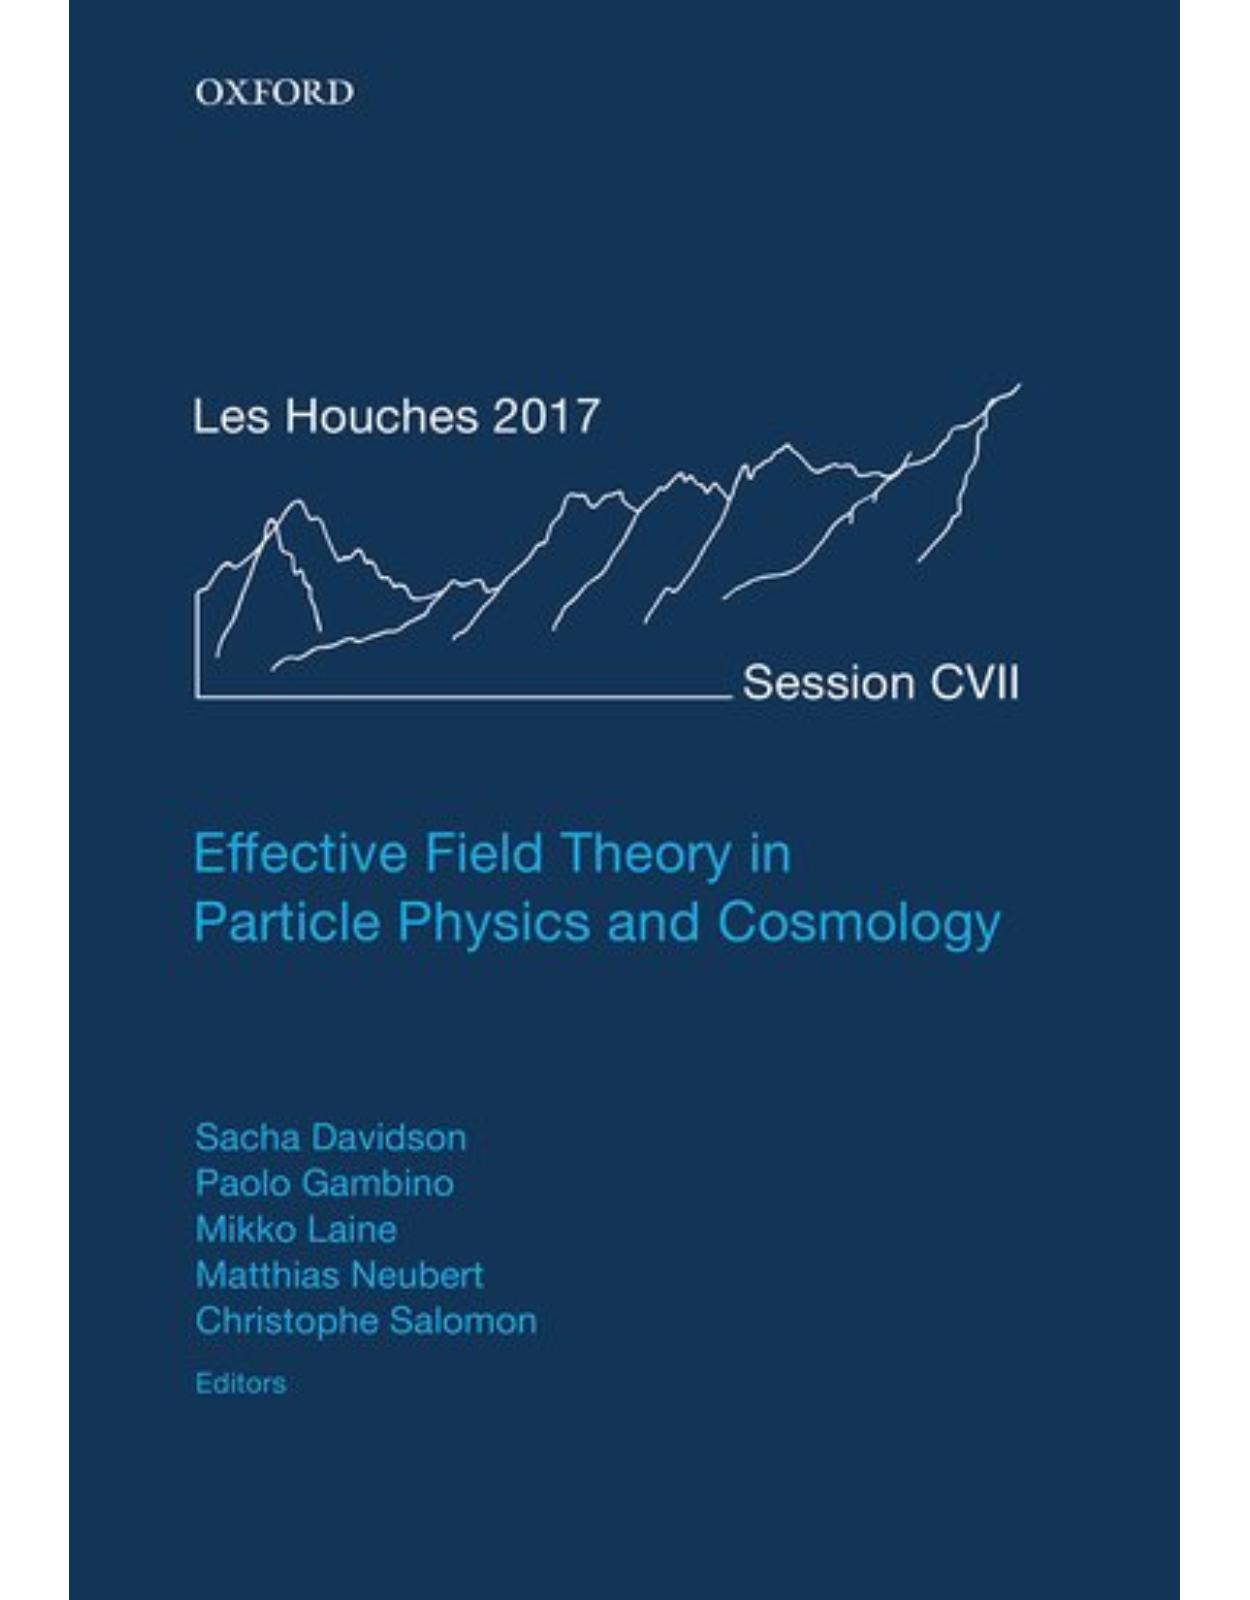 Effective Field Theories in Particle Physics and Cosmology